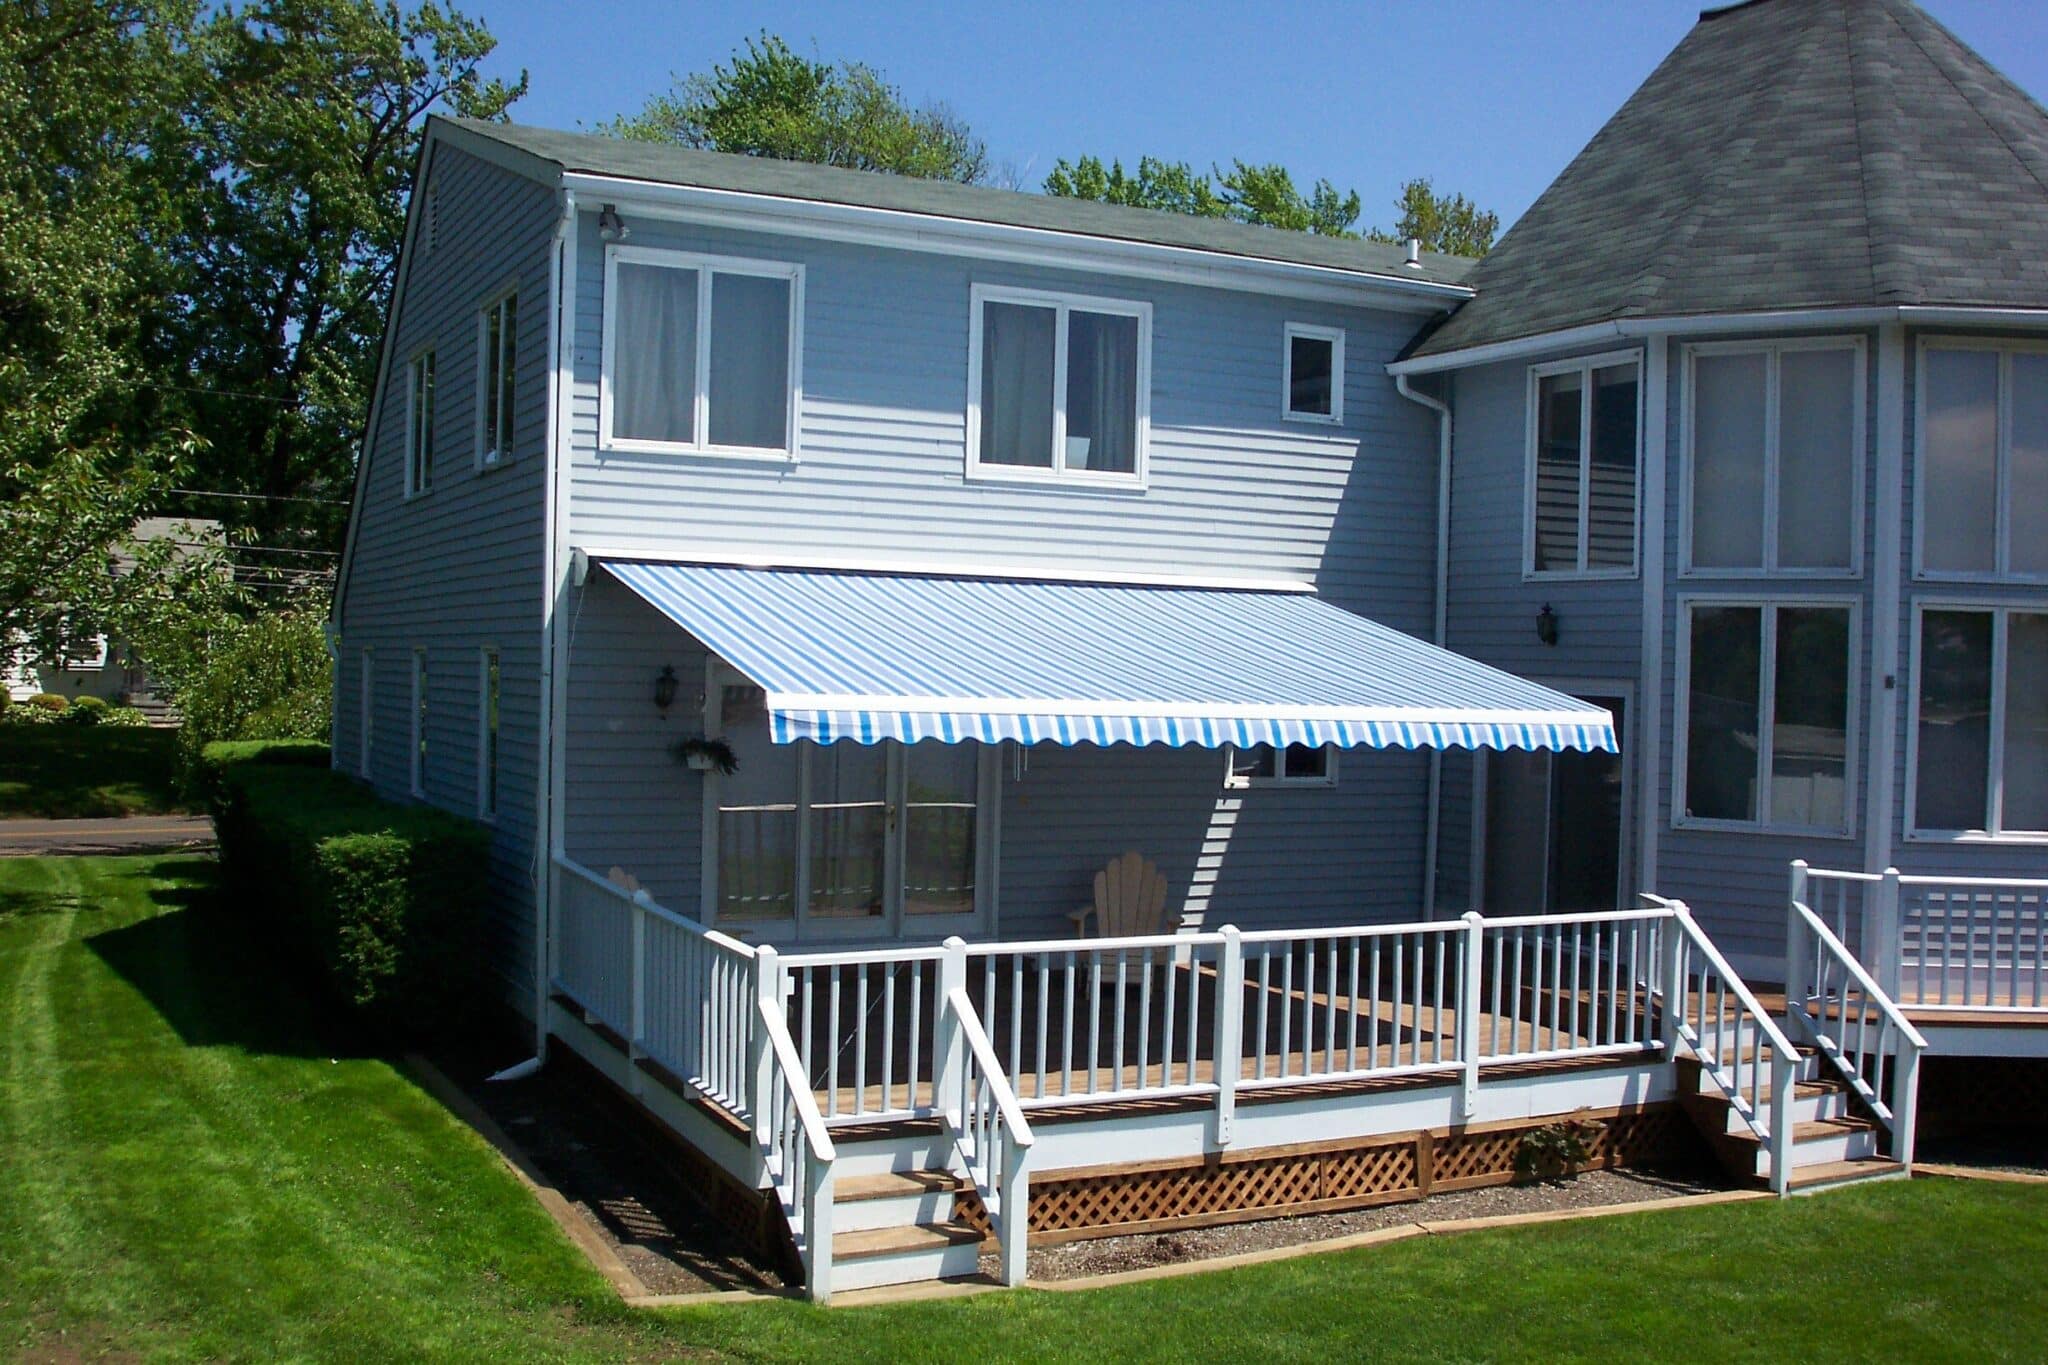 We supply and install affordable and durable retractable patio awnings-Sun shades-Manual and motorized retractable canopies